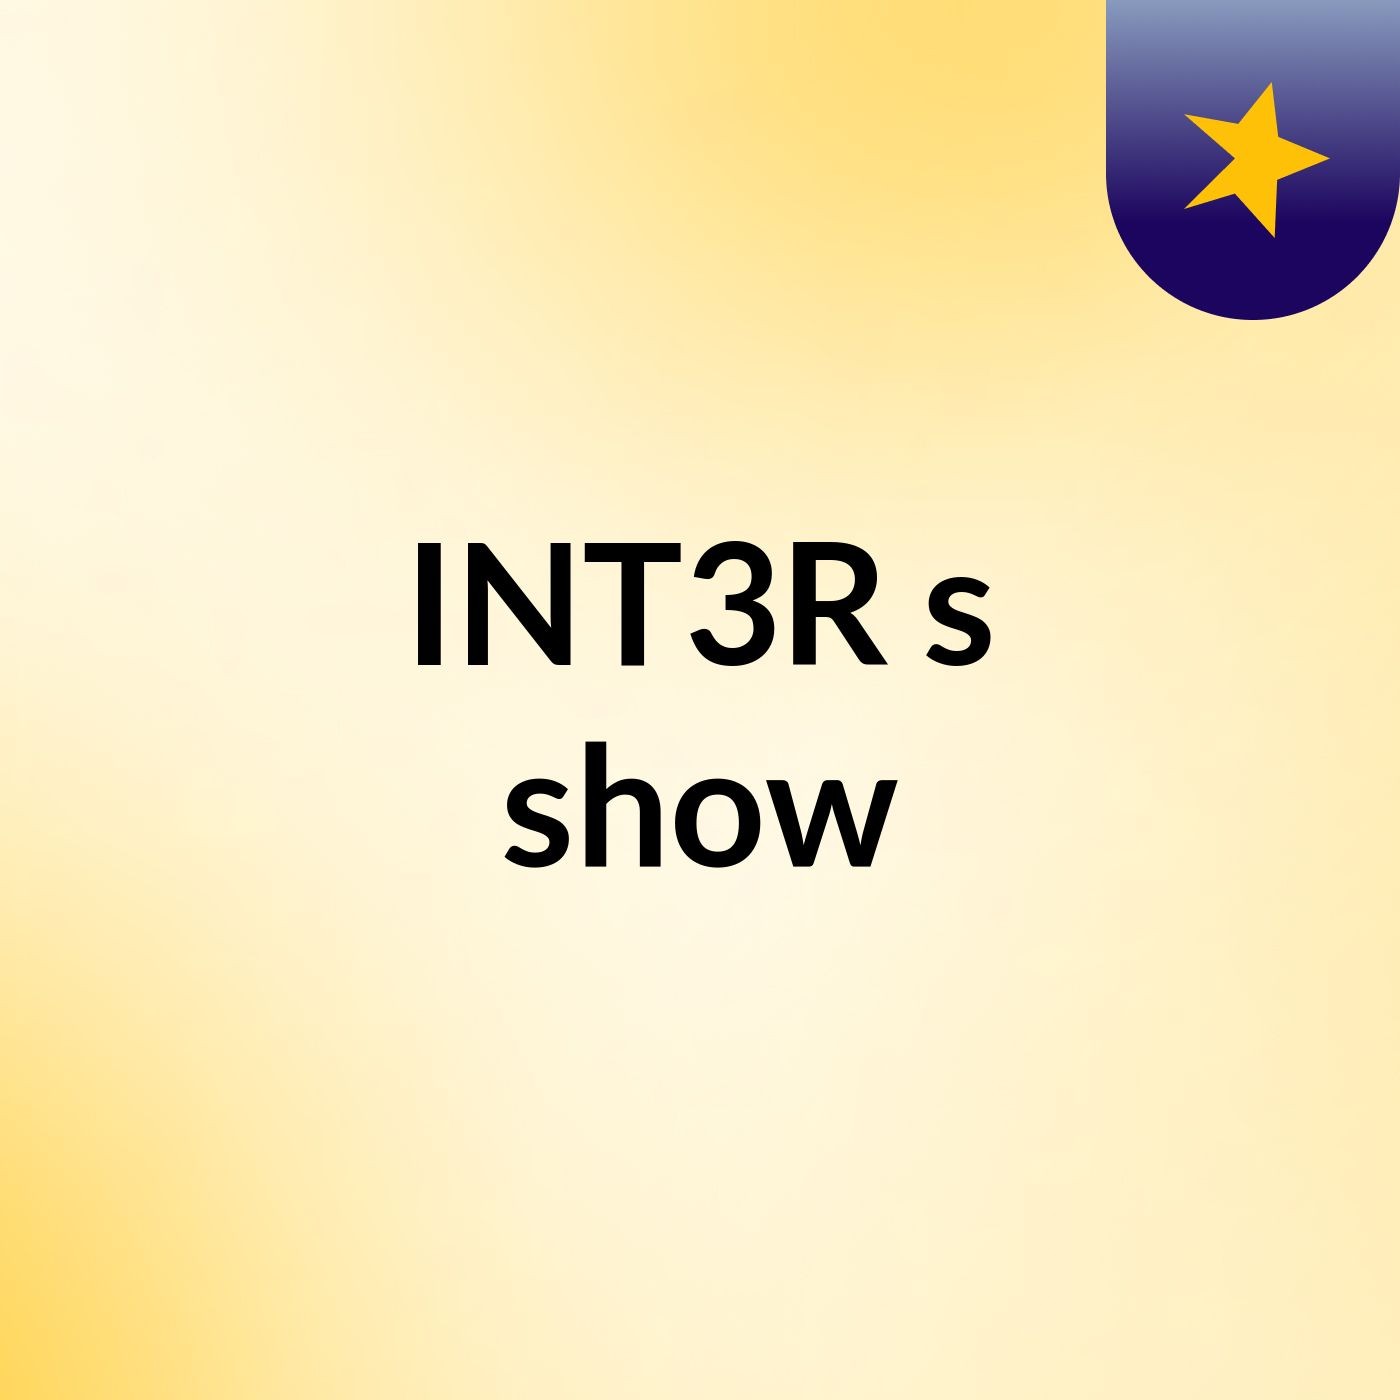 INT3R's show